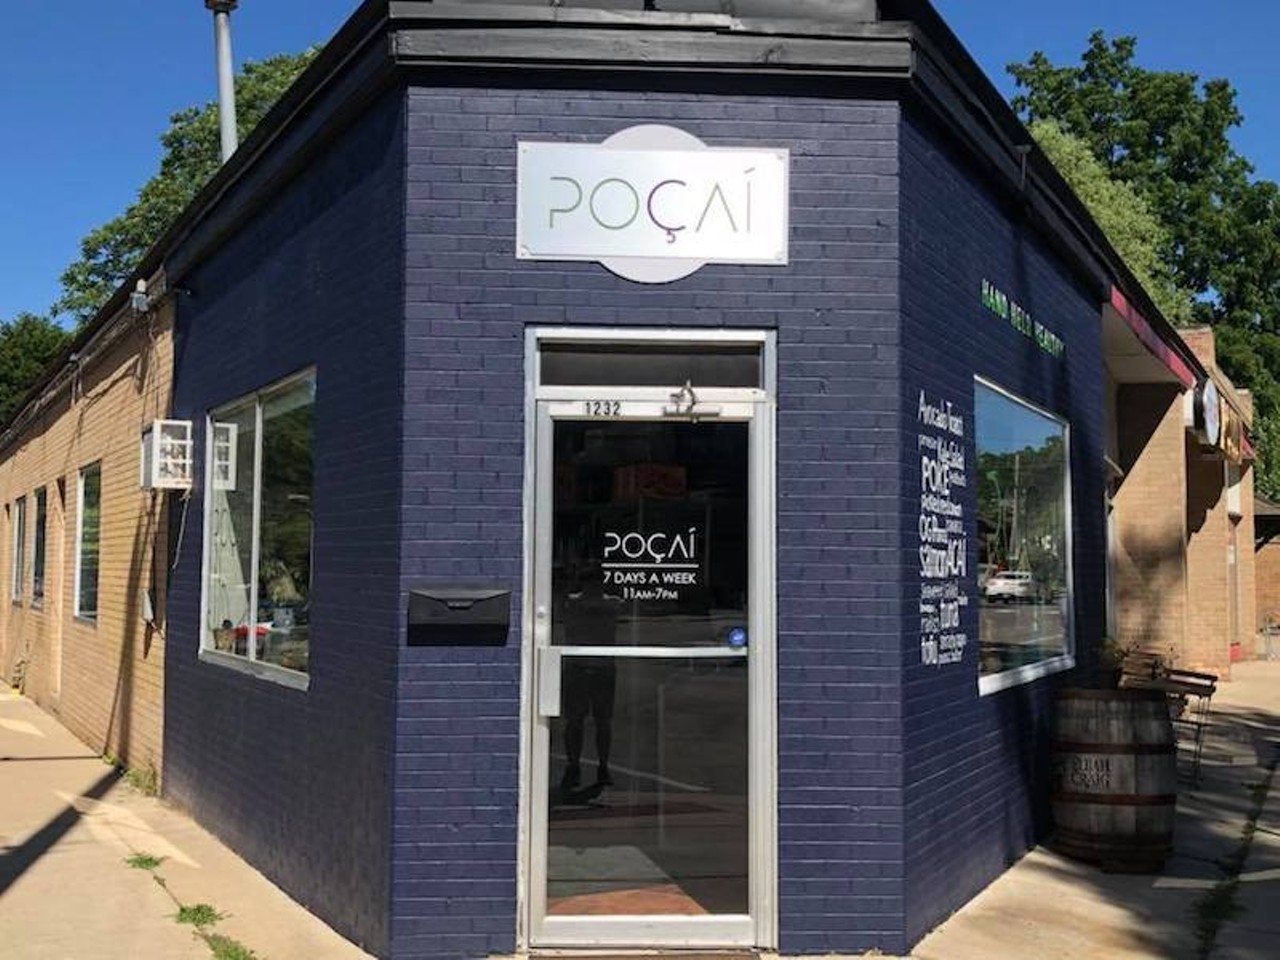 PoCai
1232 Packard St., Ann Arbor
Goodbye poke and acai bowls, hellow chicken wings. The former health food spot specailzing in poke and acai bowls, PoCai closed in November to make way for Sidebiscuit, a casual chicken spot. 
Photo via Pocai/Facebook